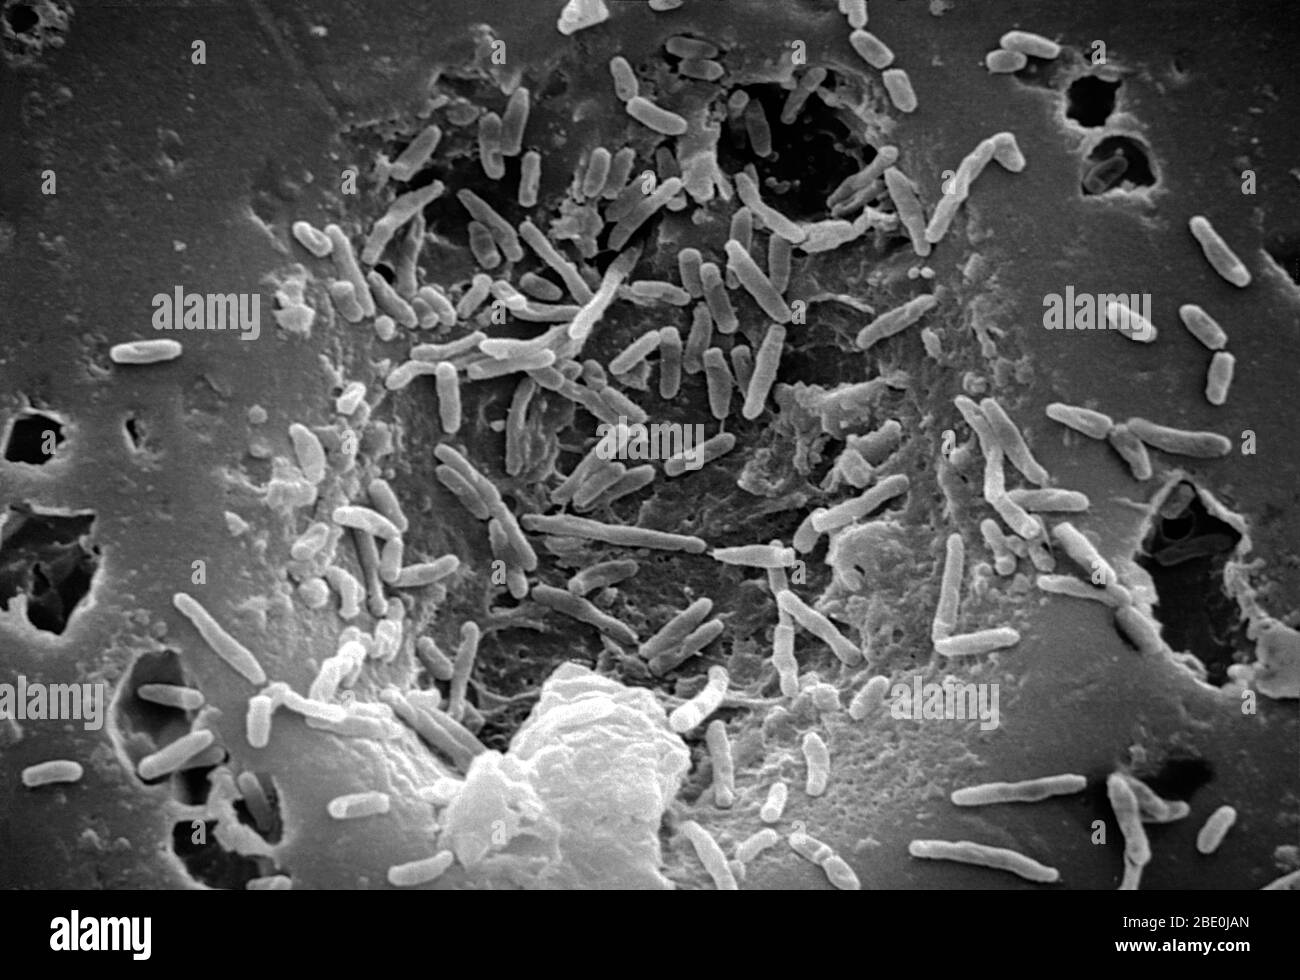 Scanning Electron Micrograph (SEM) of Mycobacterium chelonae, a type of bacteria related to that which causes tuberculosis, and which is commonly found in soil and sometimes in sputum. Mycobacterium chelonae is a species of the phylum actinobacteria (gram-positive bacteria with high guanine and cytosine content, one of the dominant phyla of all bacteria), belonging to the genus mycobacterium. M. chelonae is a rapidly growing mycobacterium, that is found all throughout the environment including sewage and tap water. M. chelonae can cause postoperative wound infections in soft tissue and bone in Stock Photo